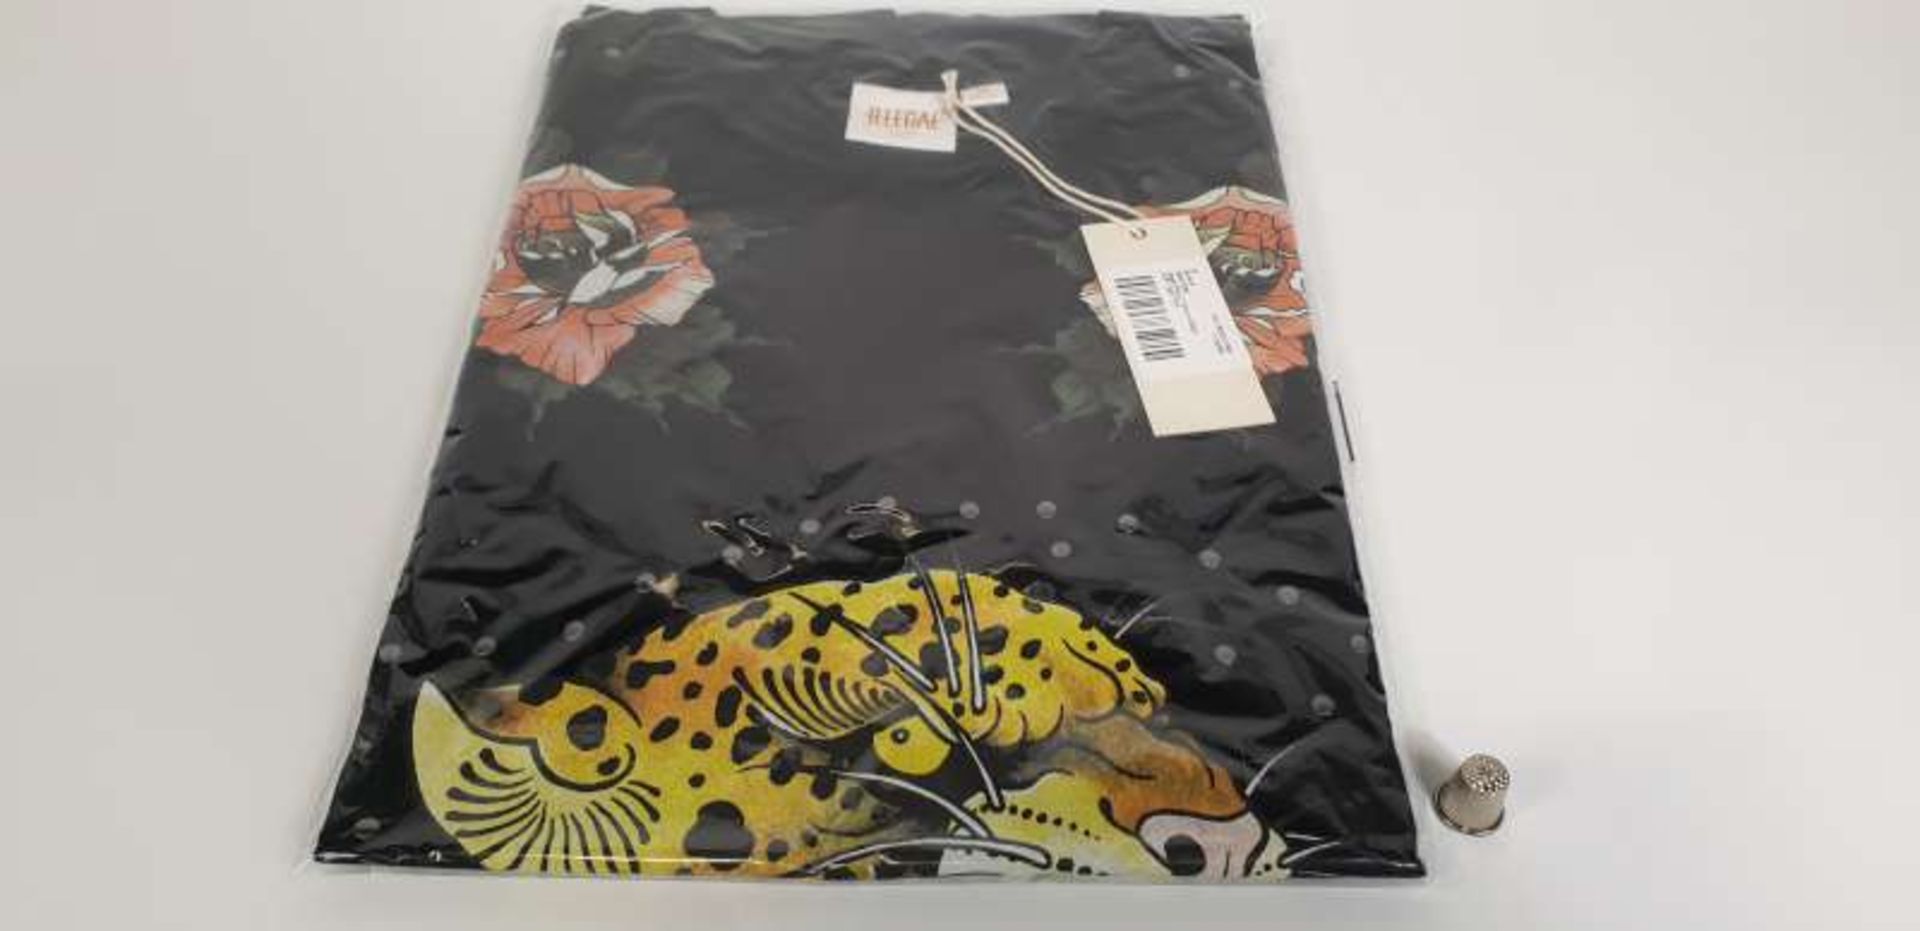 10 X BRAND NEW ILLEGAL CLUB PARIS T SHIRTS WITH TIGER PRINT DETAIL IN VARIOUS SIZES